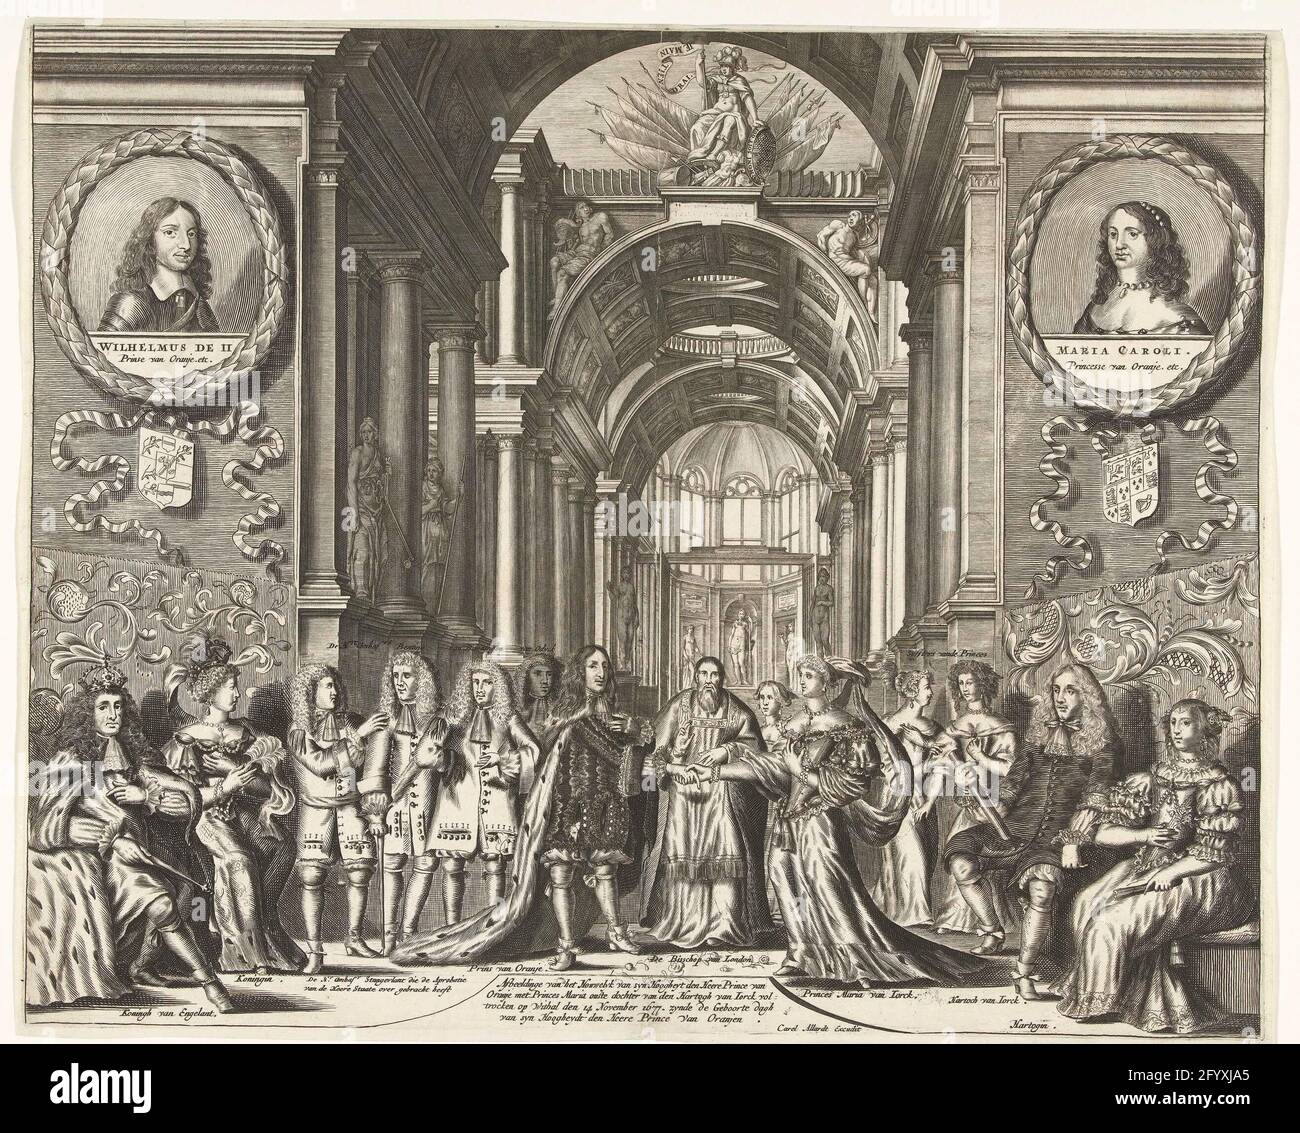 Marriage of Prince Willem III with Maria Stuart, 1677; Image of the Houwelky of Syn Hoogheyt den Heere Prince van Oranje with Princes Maria Ouste daughter of the Hartogh from Jorck Voltrocks at Withal den November 14, 1677, the birth dagh of Syn Heogheydt the Lord Prince of Oranjen. The marriage of Prince Willem III with Maria II Stuart in Whitehall in London, November 14, 1677. Protection of the ceremony through the bishop of London. Links Karel II King of England with Queen, Right Jacobus II, the Duke of York with Duchess. At the top of medallions portraits of the parents of the Prince: Will Stock Photo